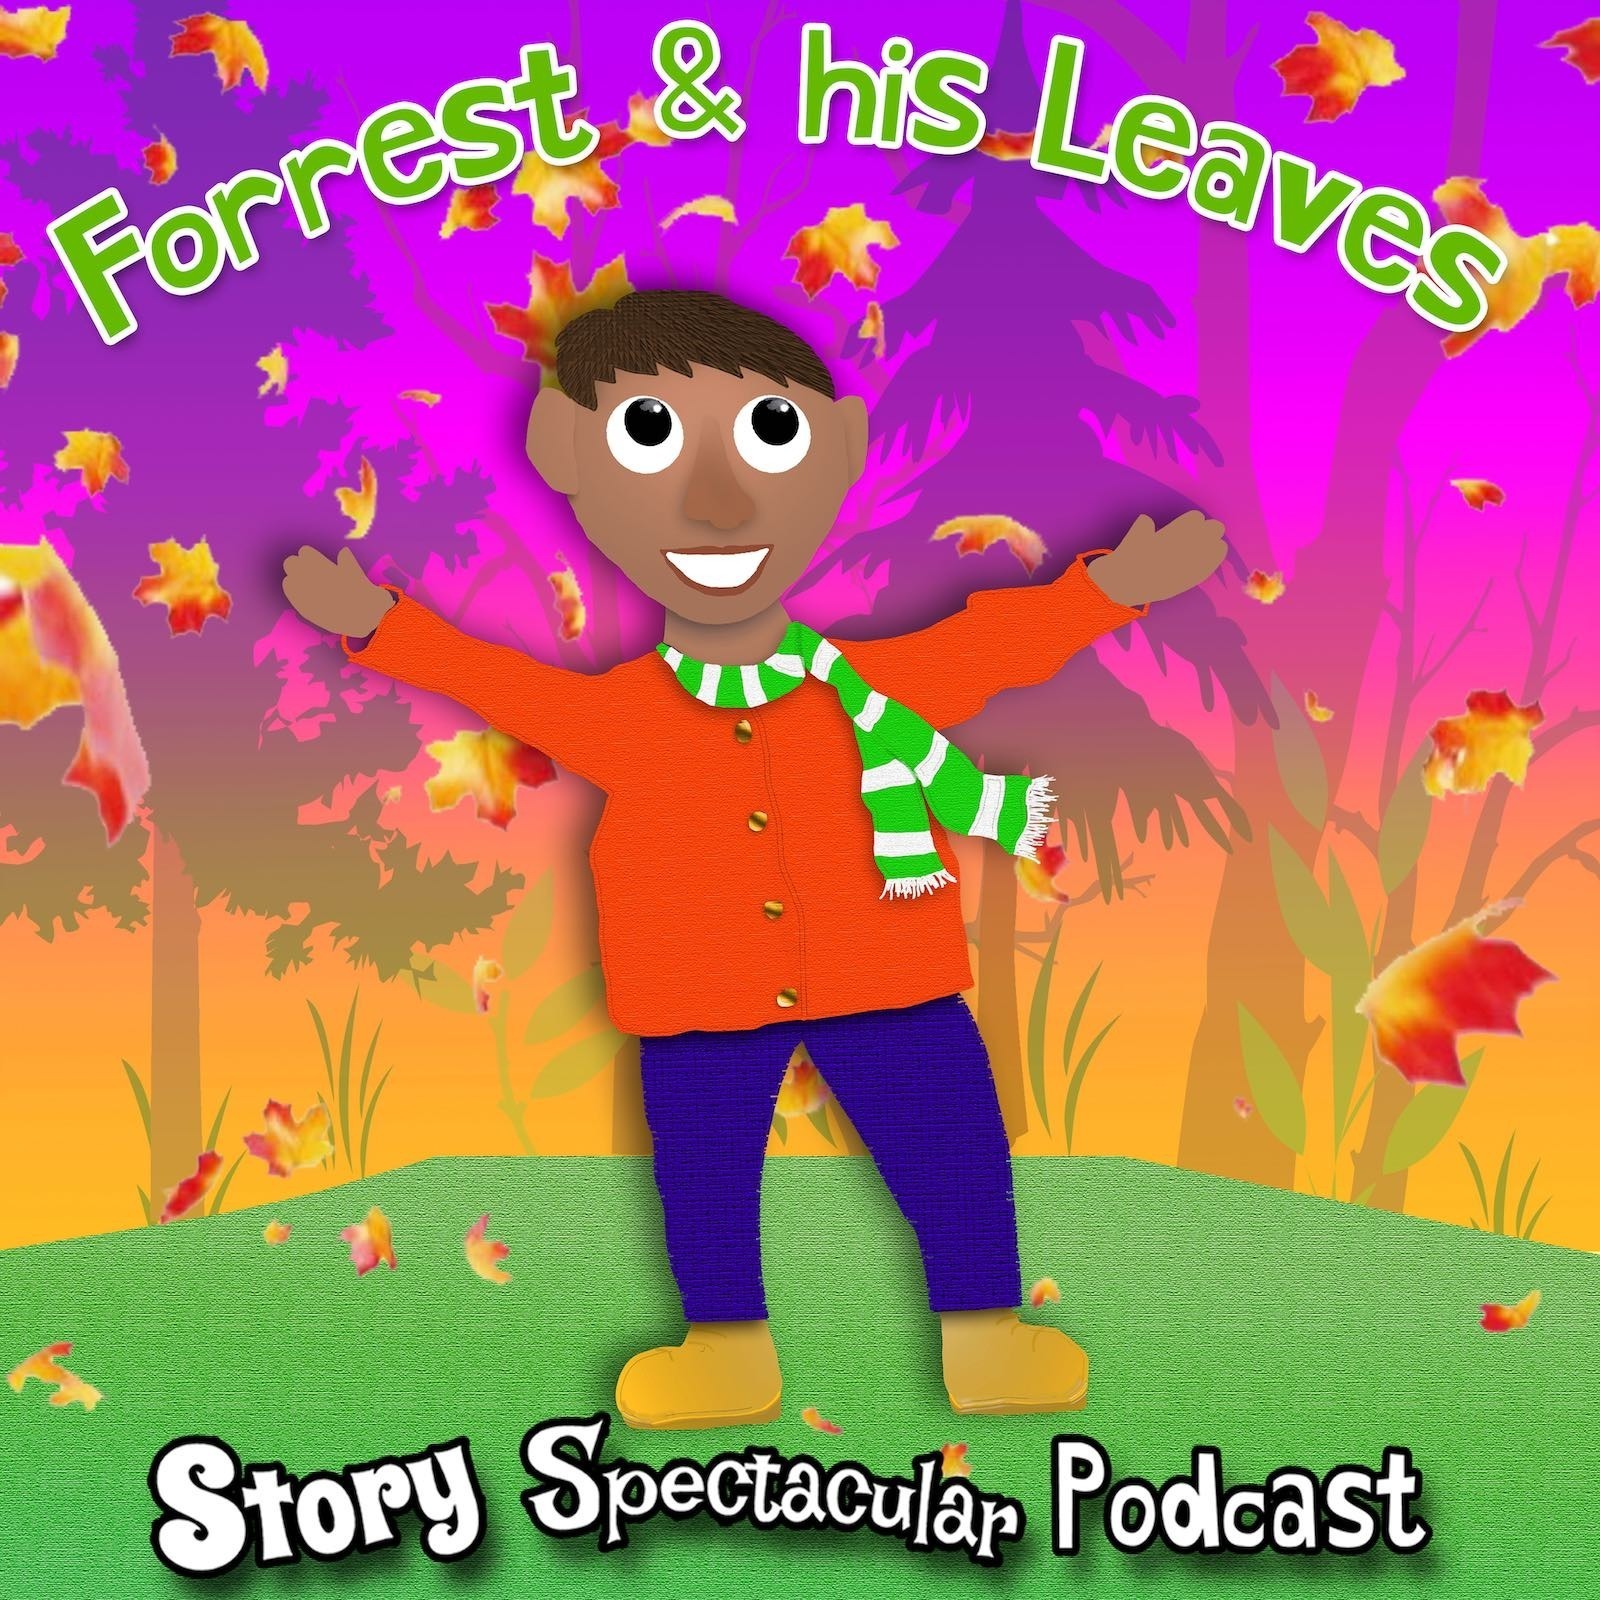 Forrest & His Leaves